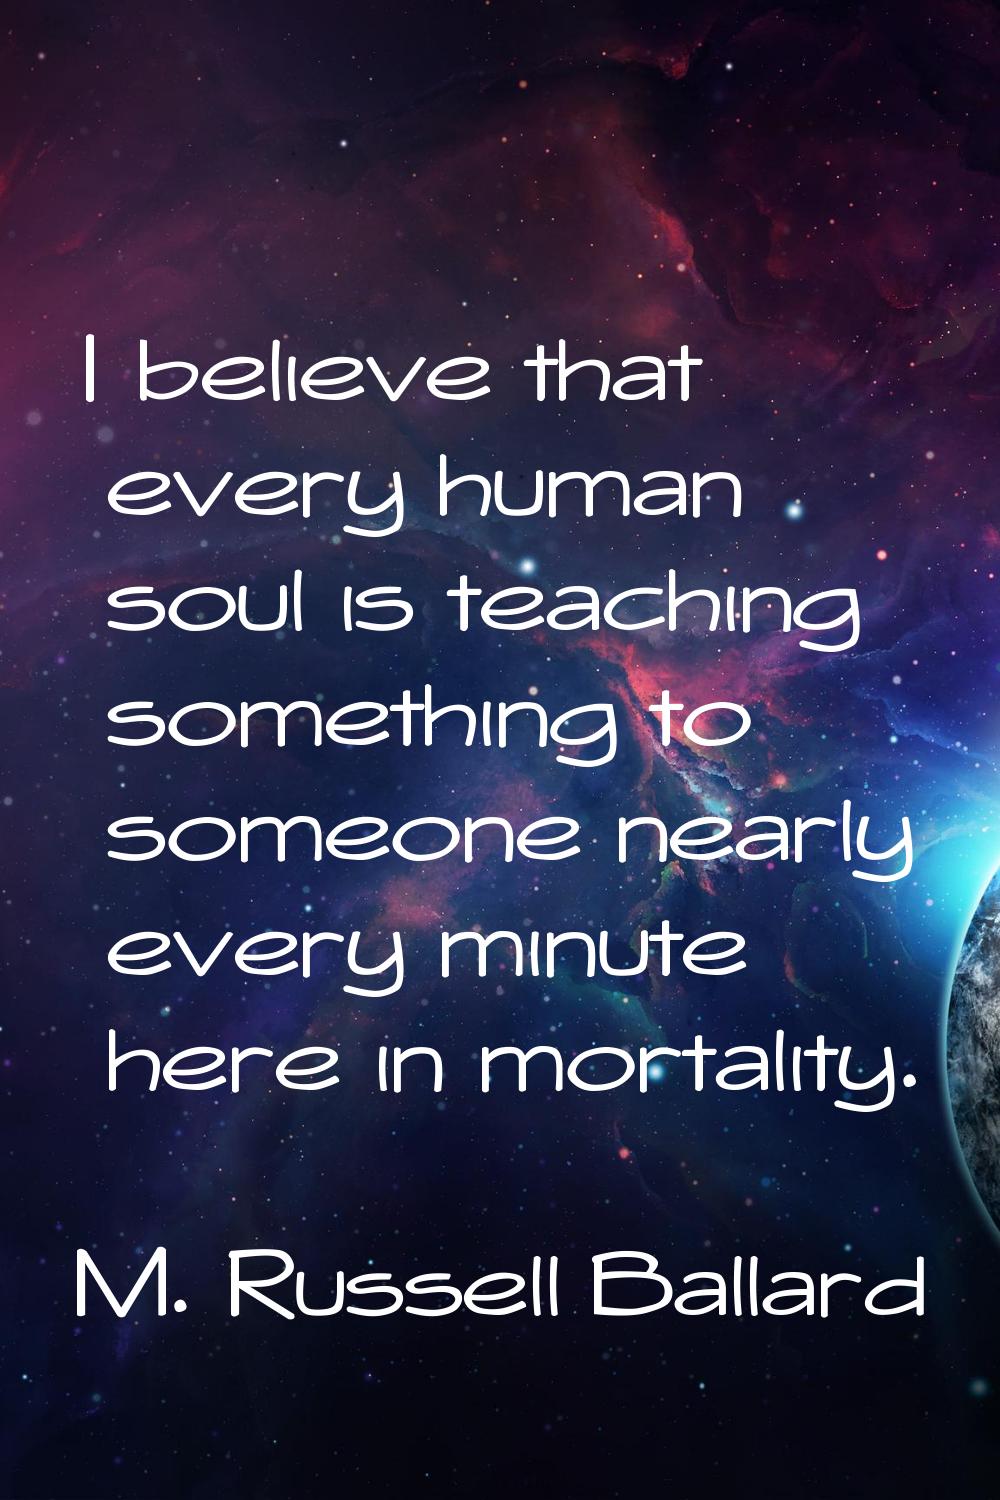 I believe that every human soul is teaching something to someone nearly every minute here in mortal